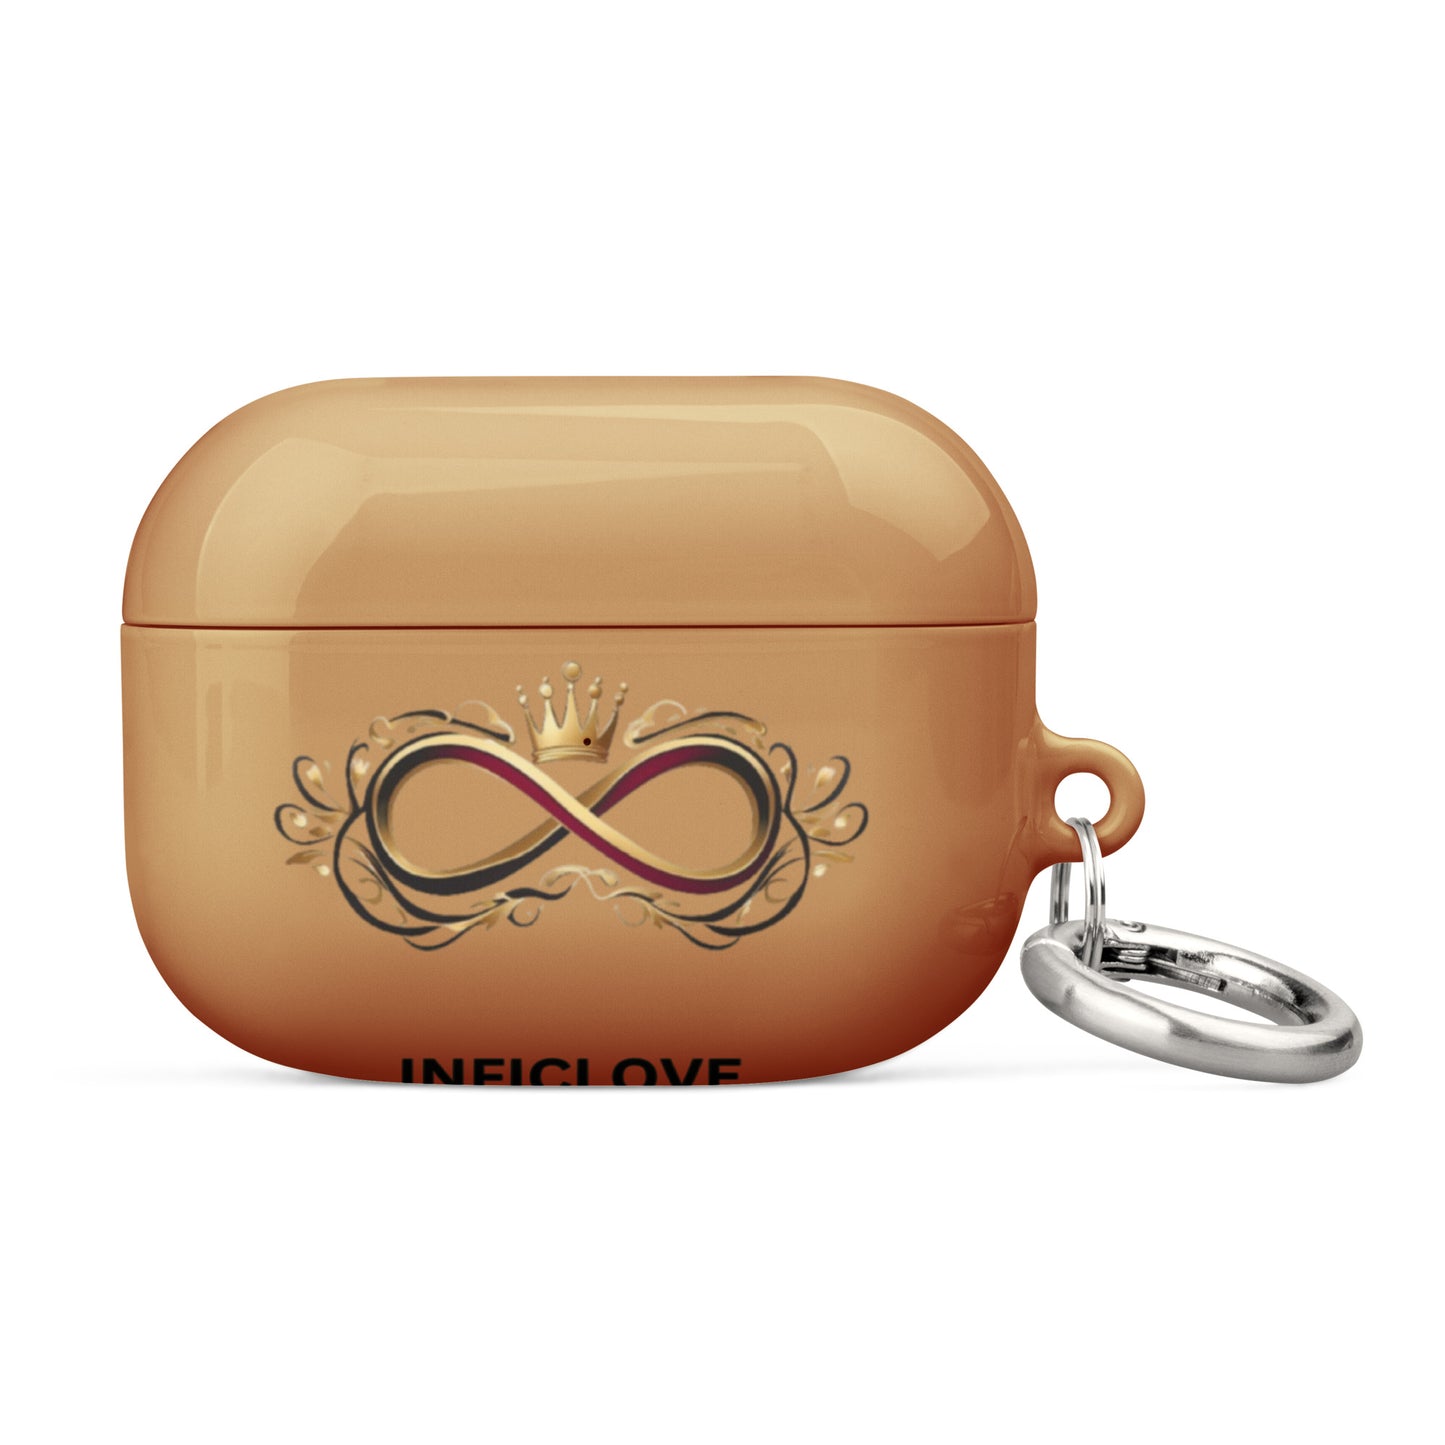 Black and Gold InficLove Logo Design Case for AirPods®